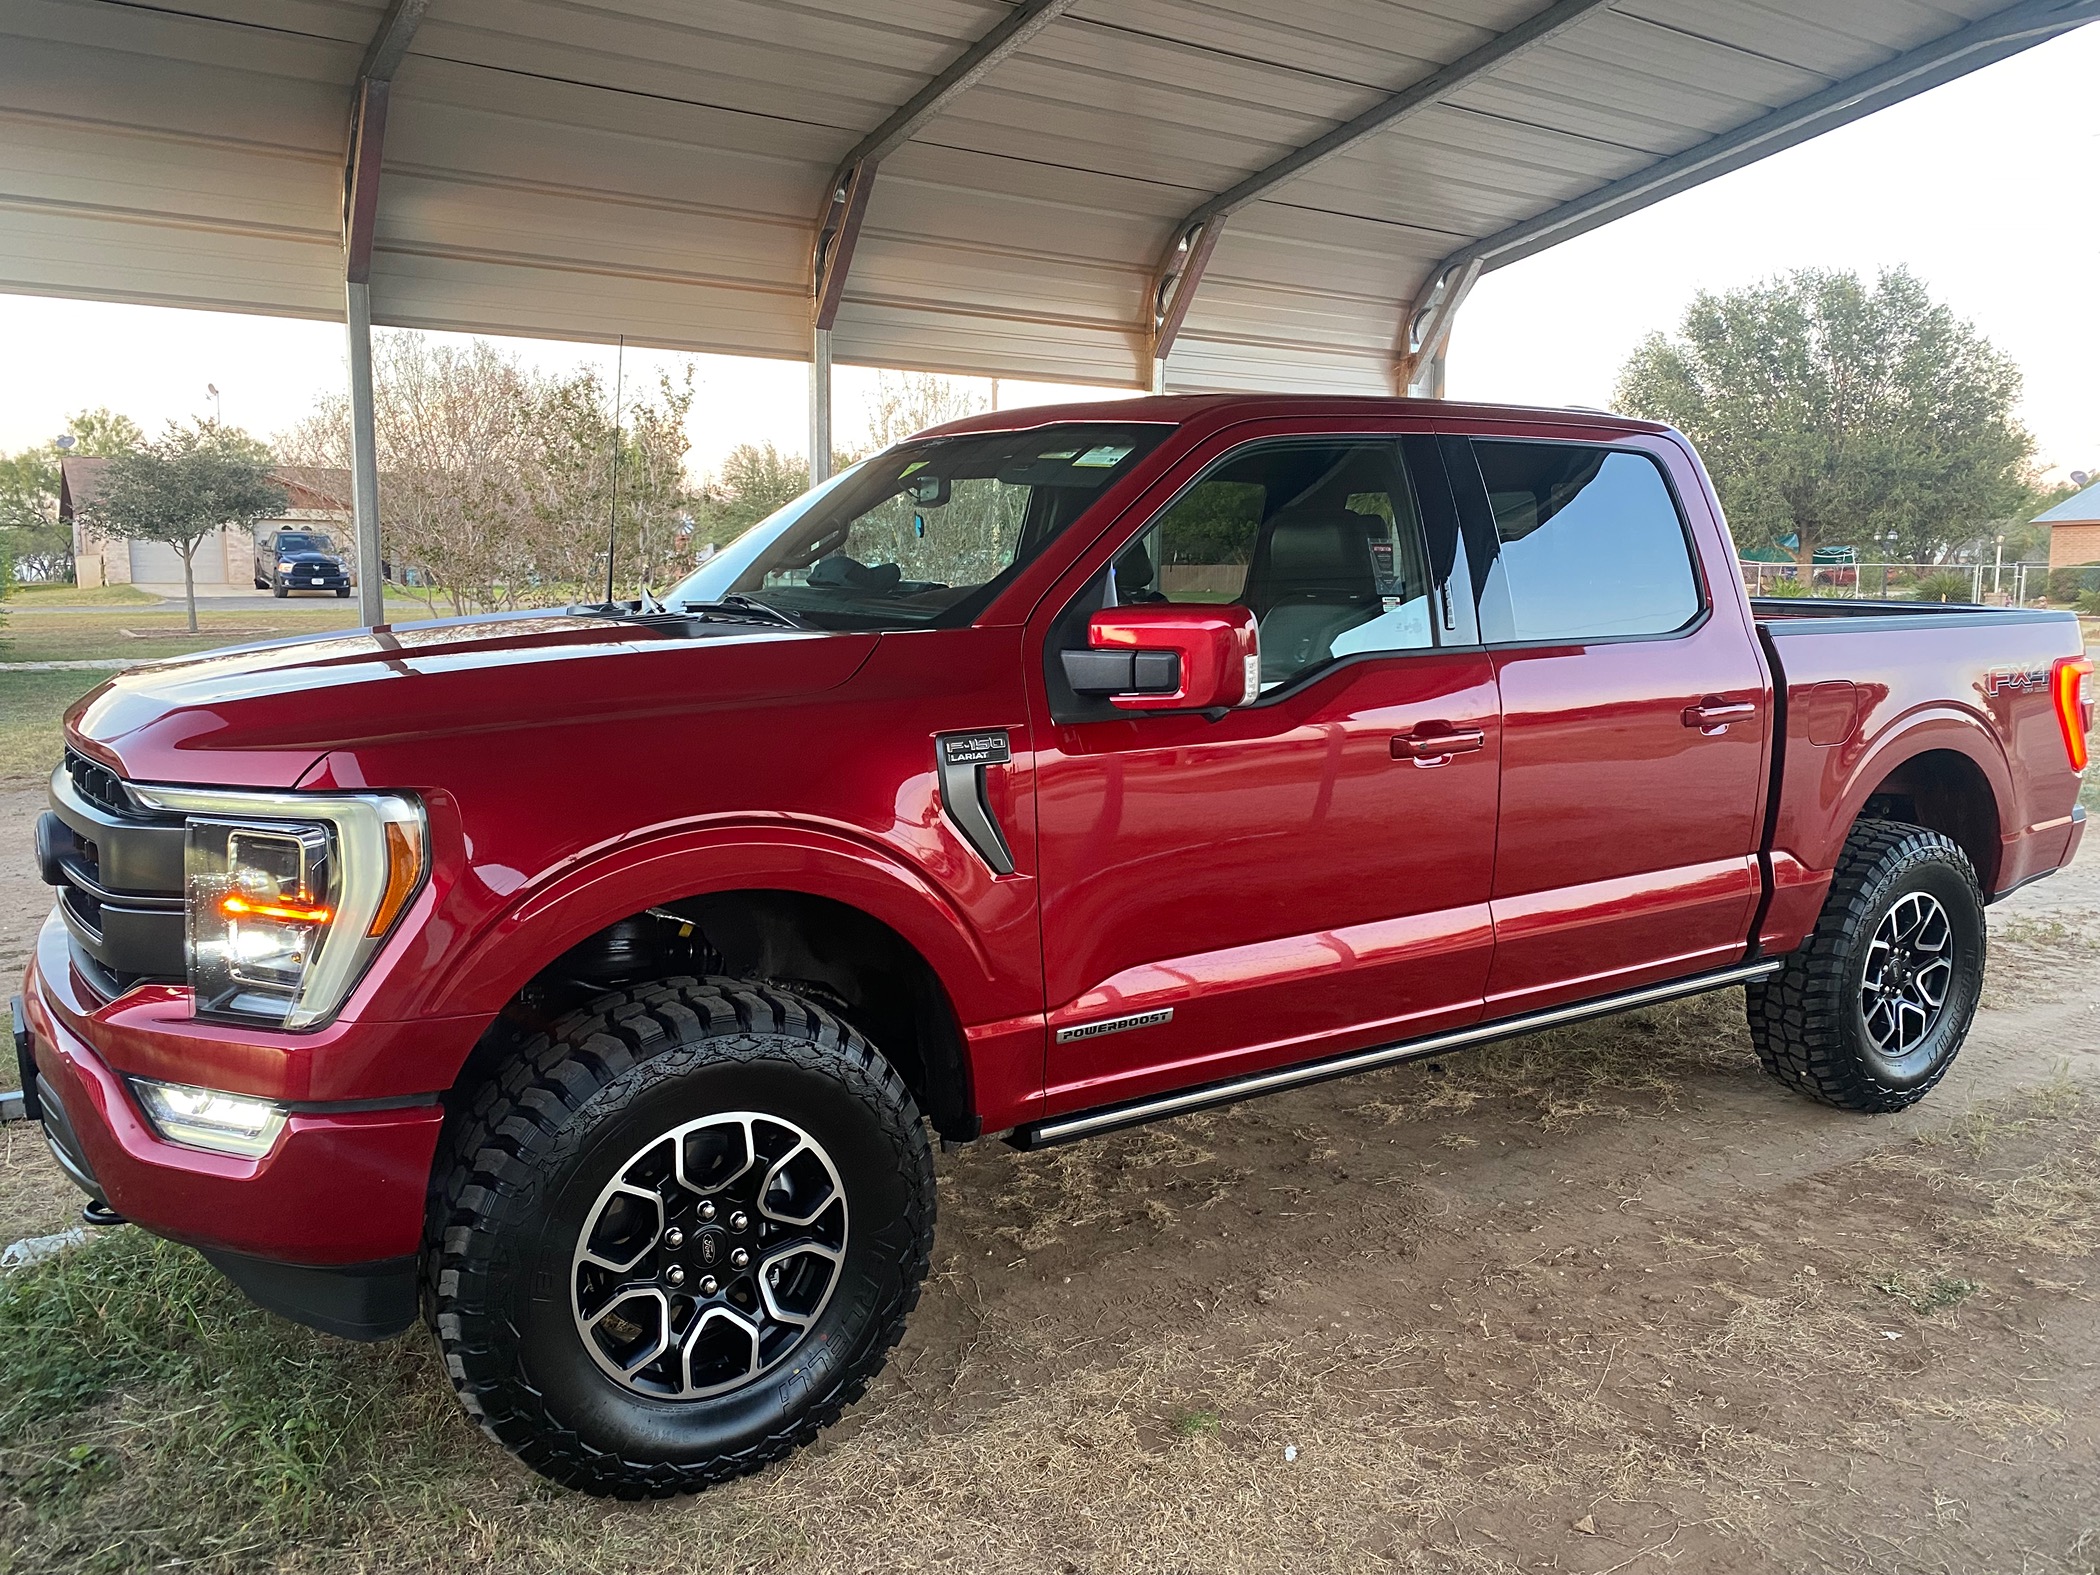 Ford F-150 Random F-150 Photos of the Day - Post Yours! 📸 🤳 IMG_5019